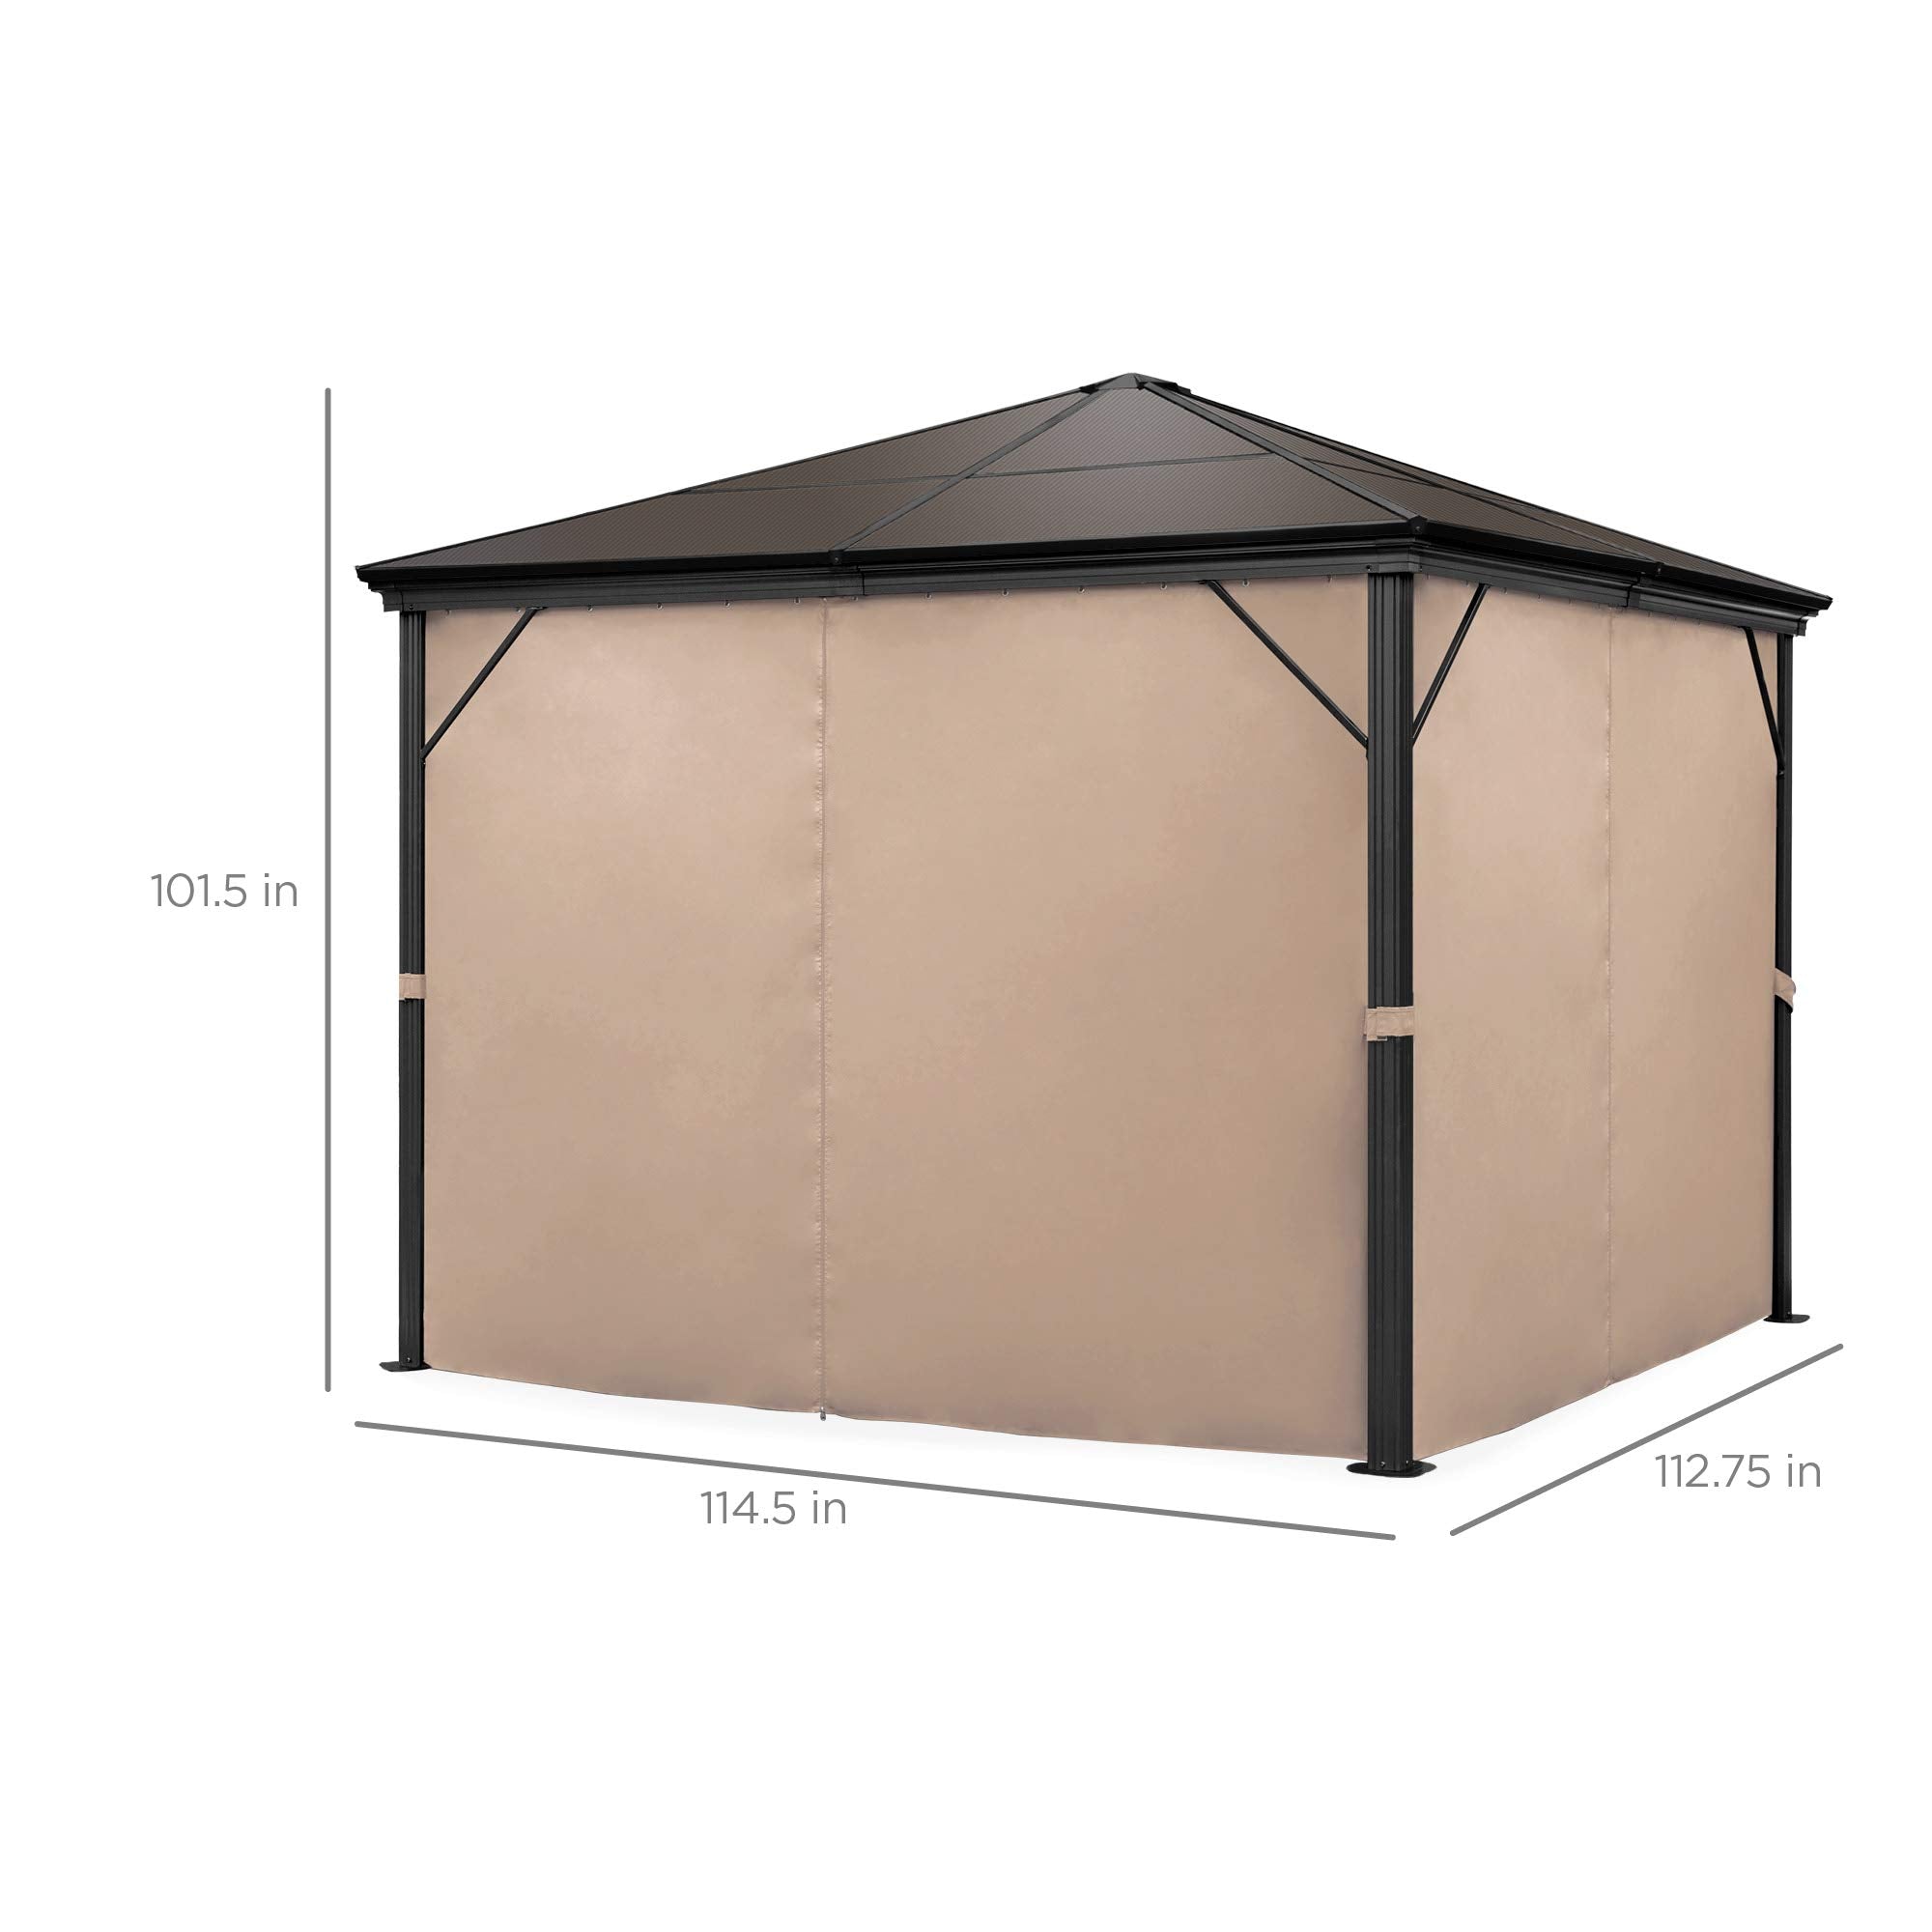 Best Choice Products 10x10ft Hardtop Gazebo, Outdoor Aluminum Canopy for Backyard, Patio, Garden w/Side Curtains, Mosquito Netting, Zippered Door